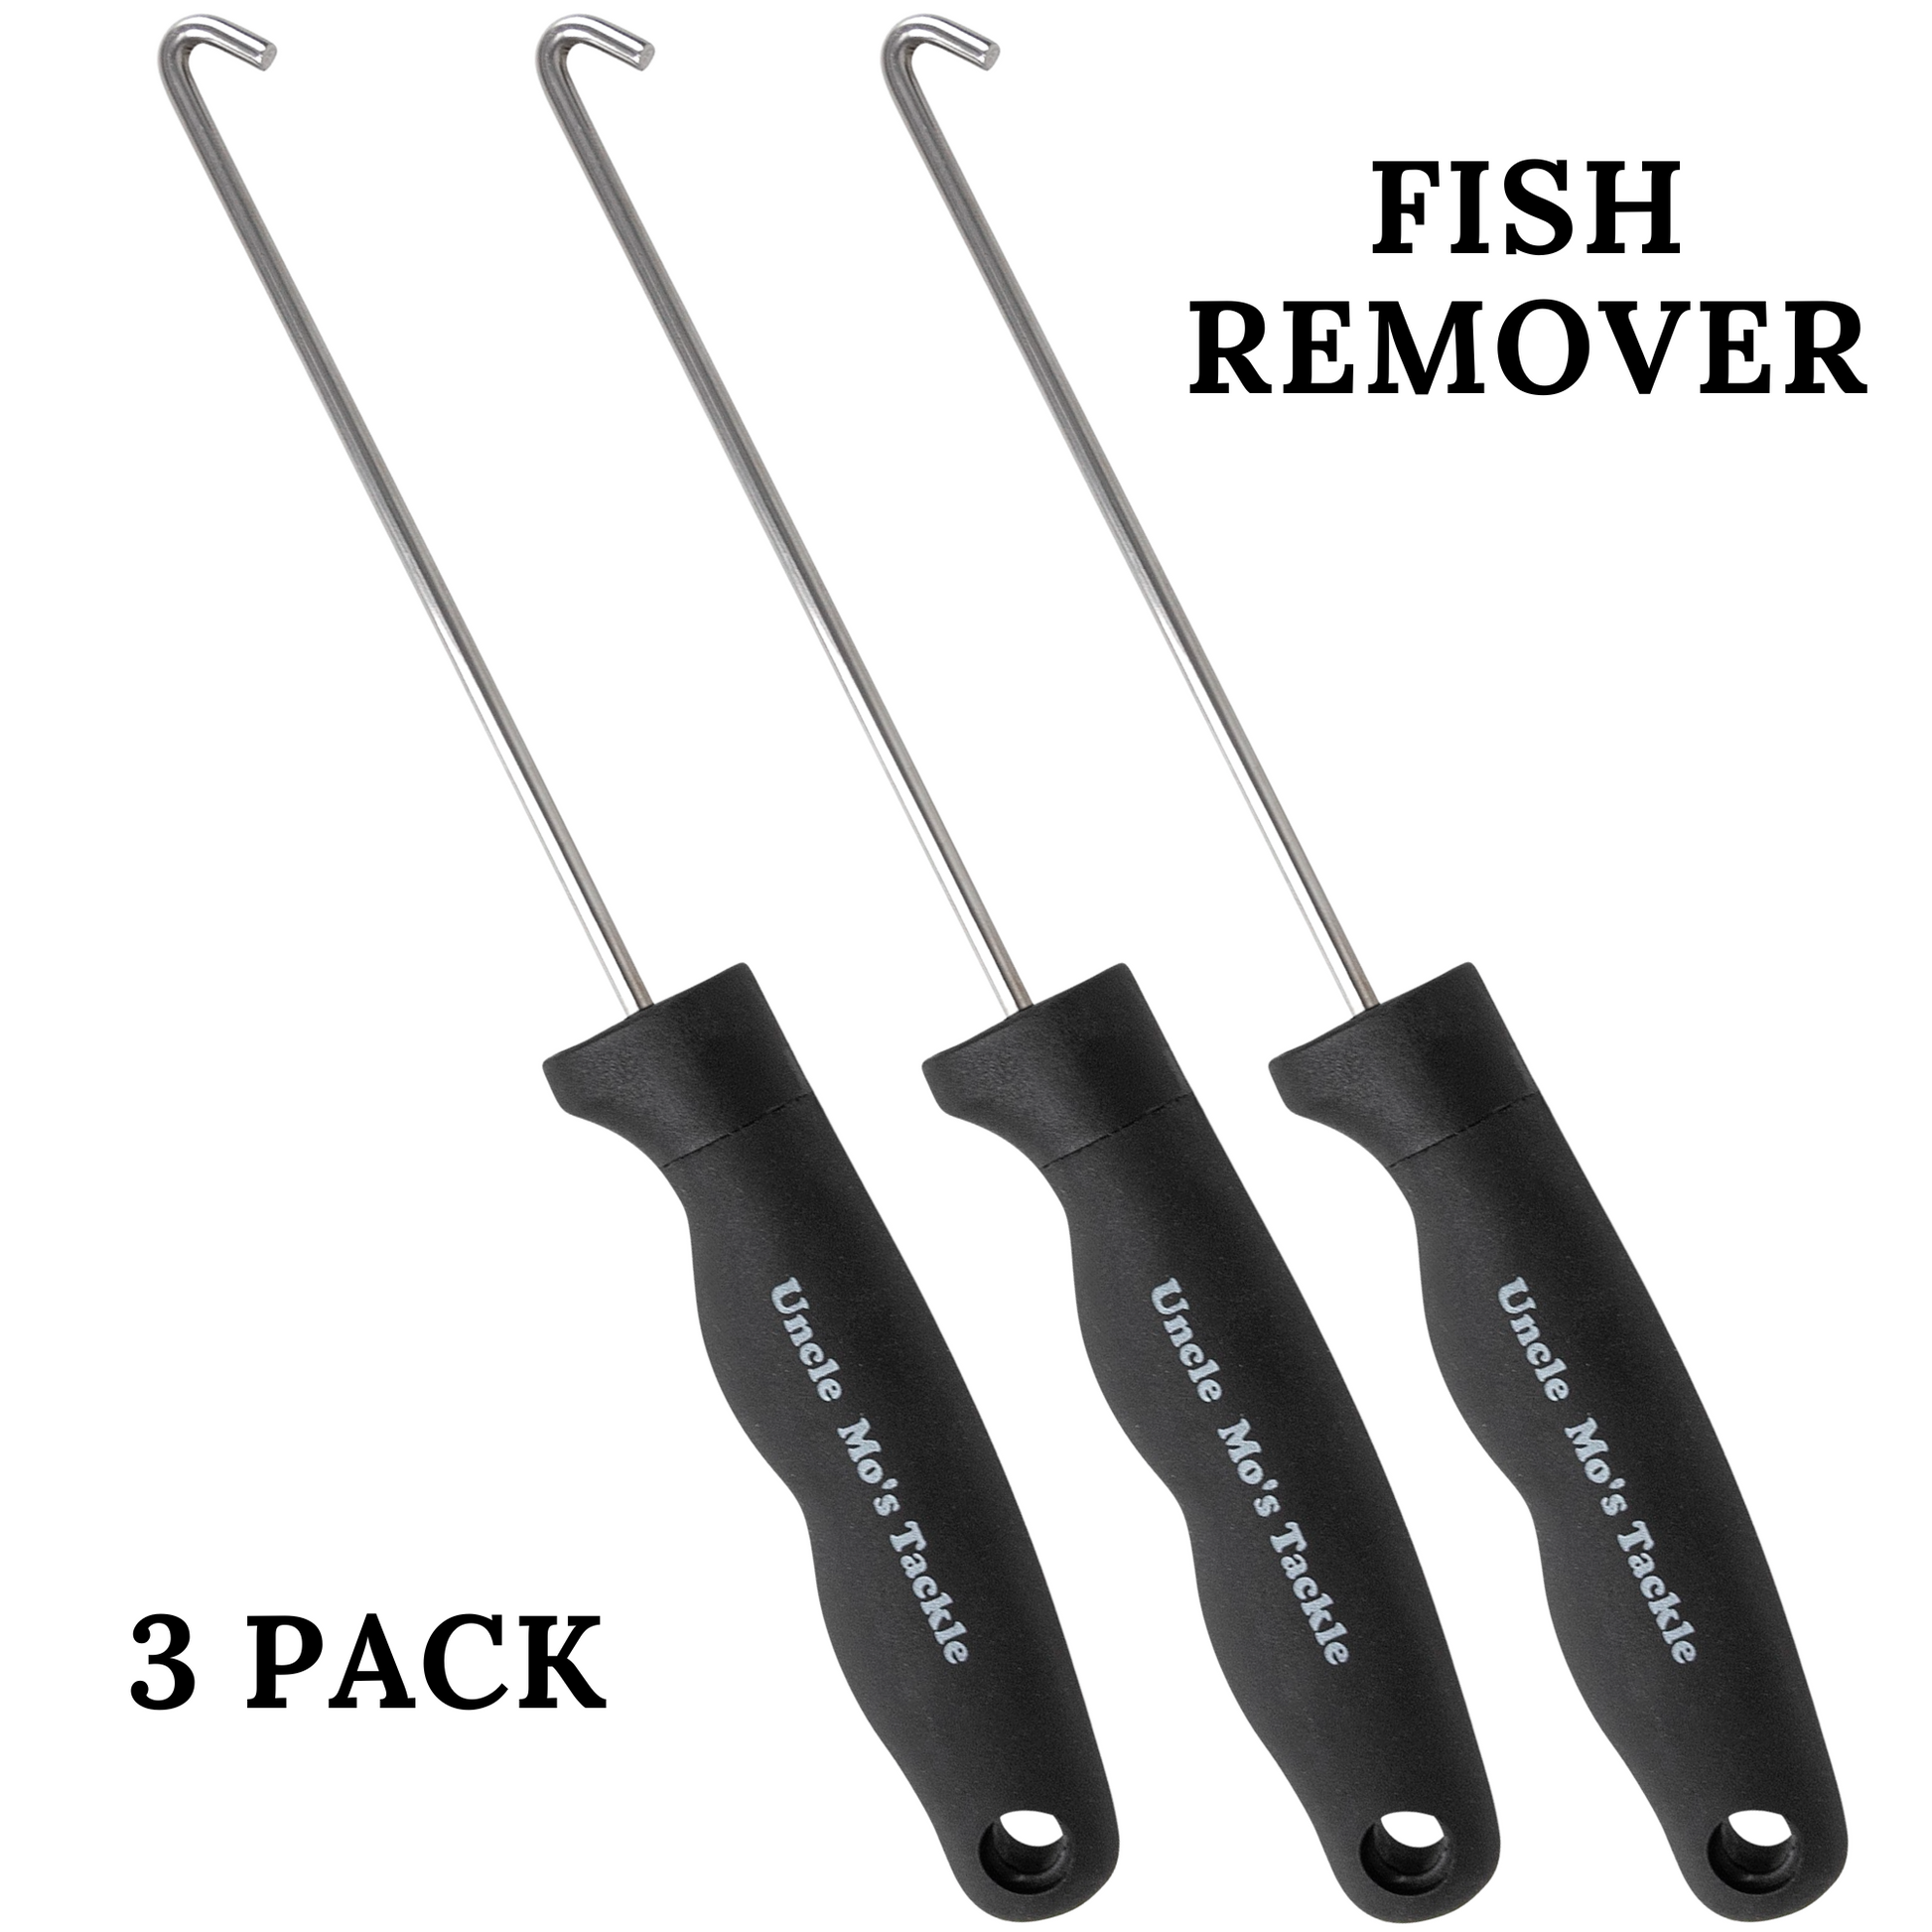 (1Pack) Durable HooKouT, Fish De-Hooker, 10 inch Hook Remover Tool - Uncle Mos Tackle, Size: 1 Pack, Black